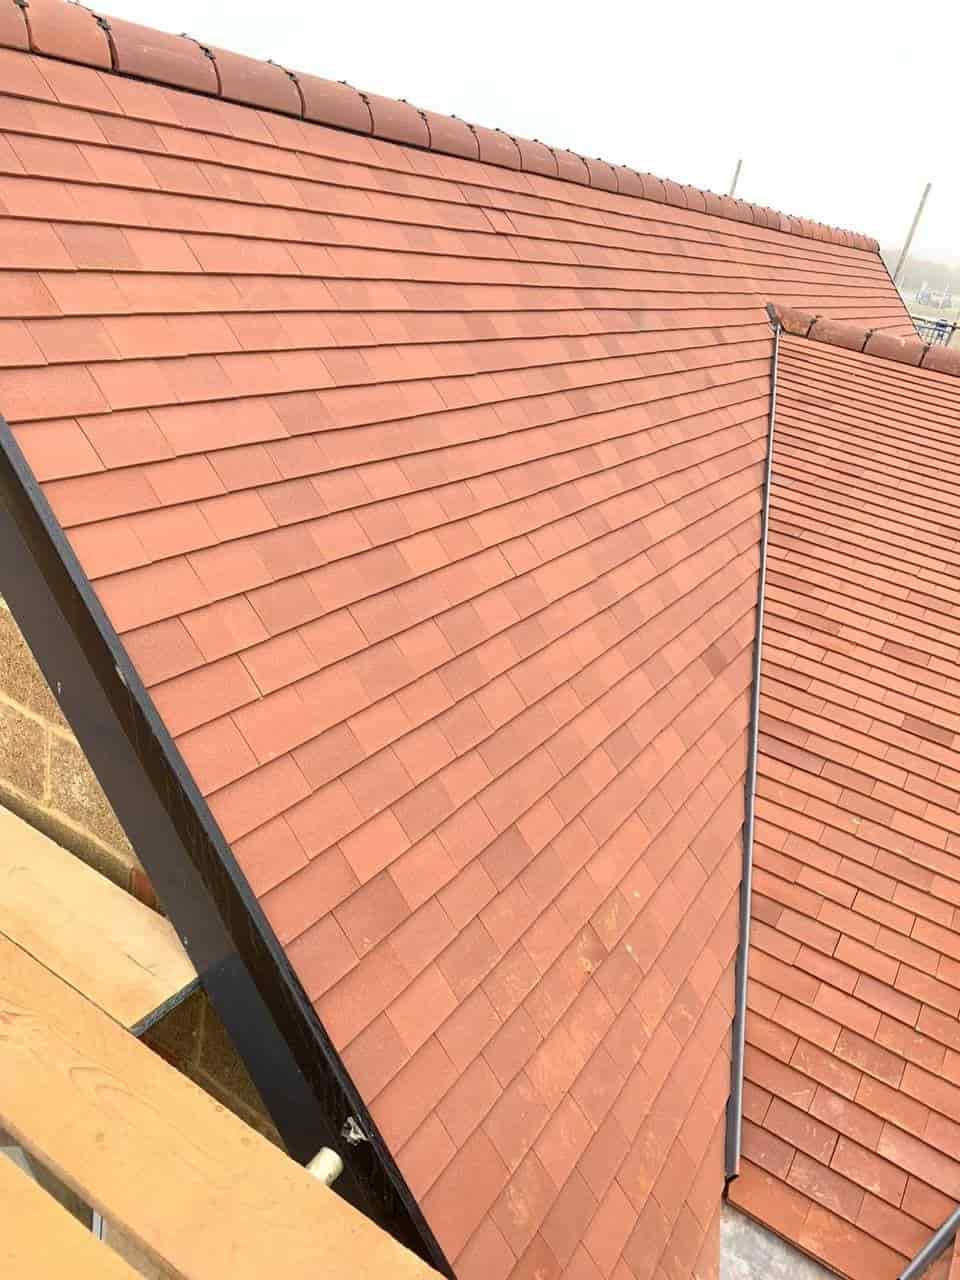 This is a photo of a new build roof installed in Sittingbourne Kent. All works carried out by Sittingbourne Roofing Services